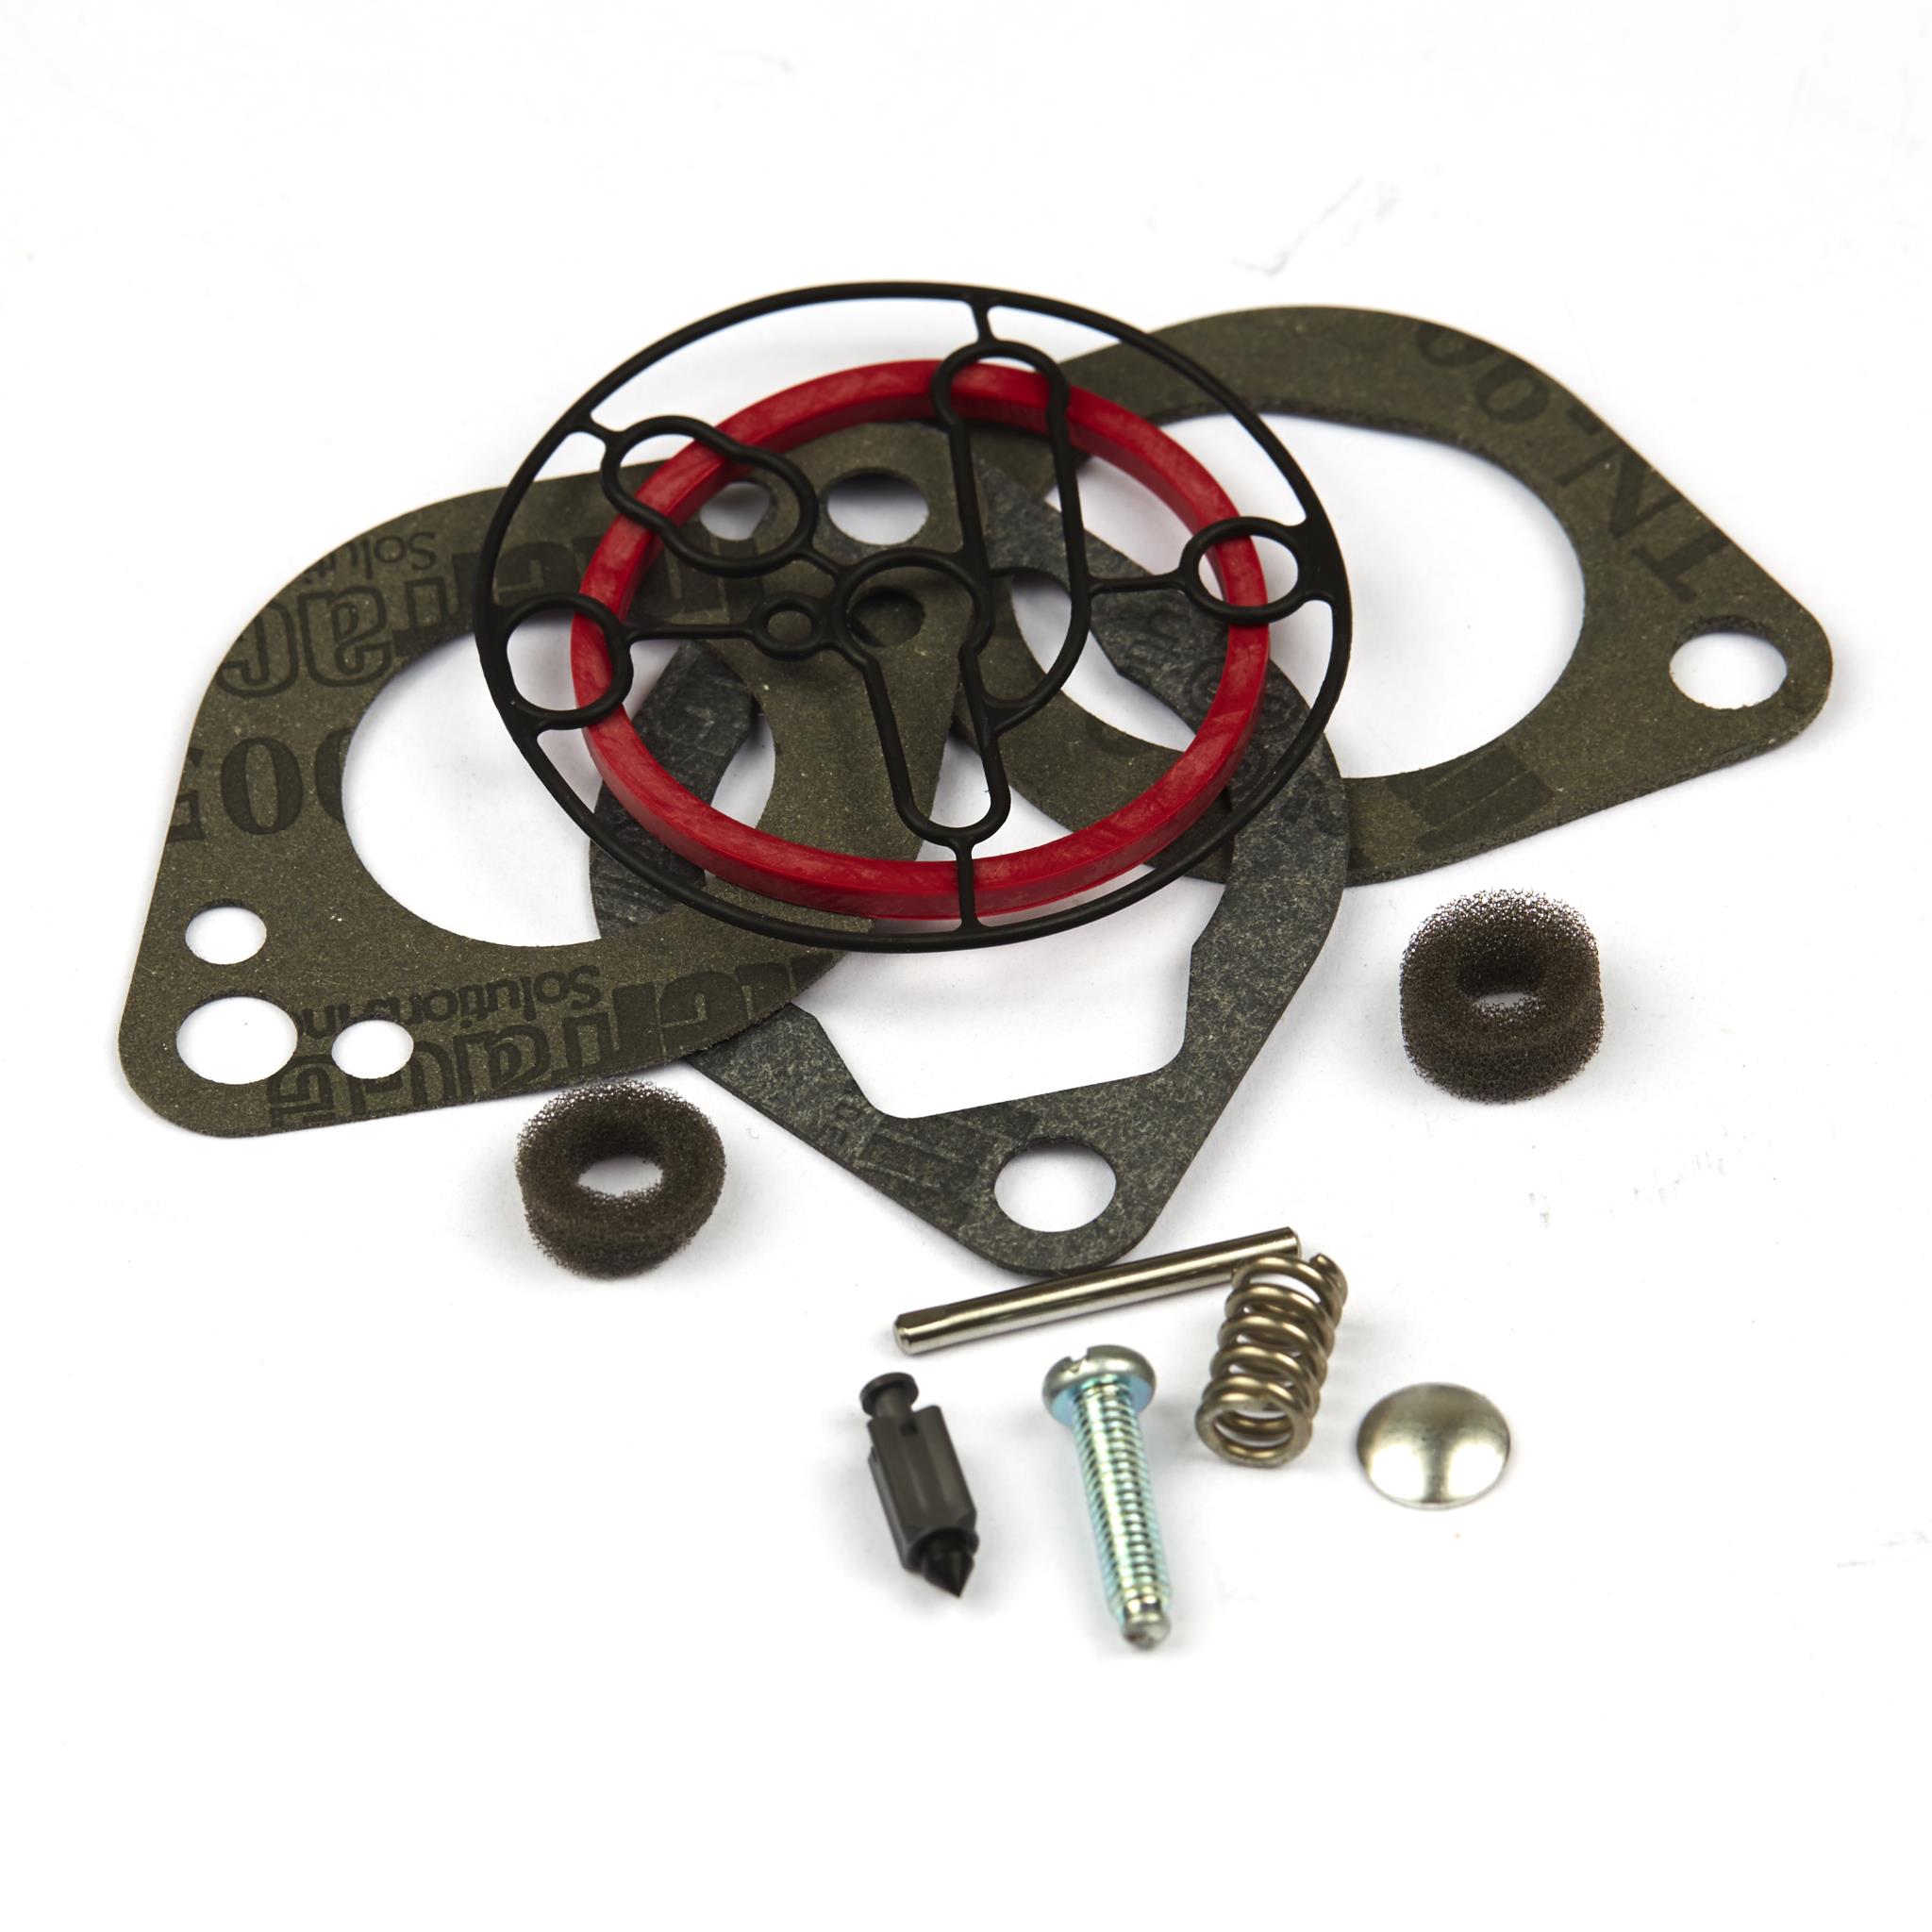 KIT CARB OVERHAUL part# 696146 by Briggs & Stratton